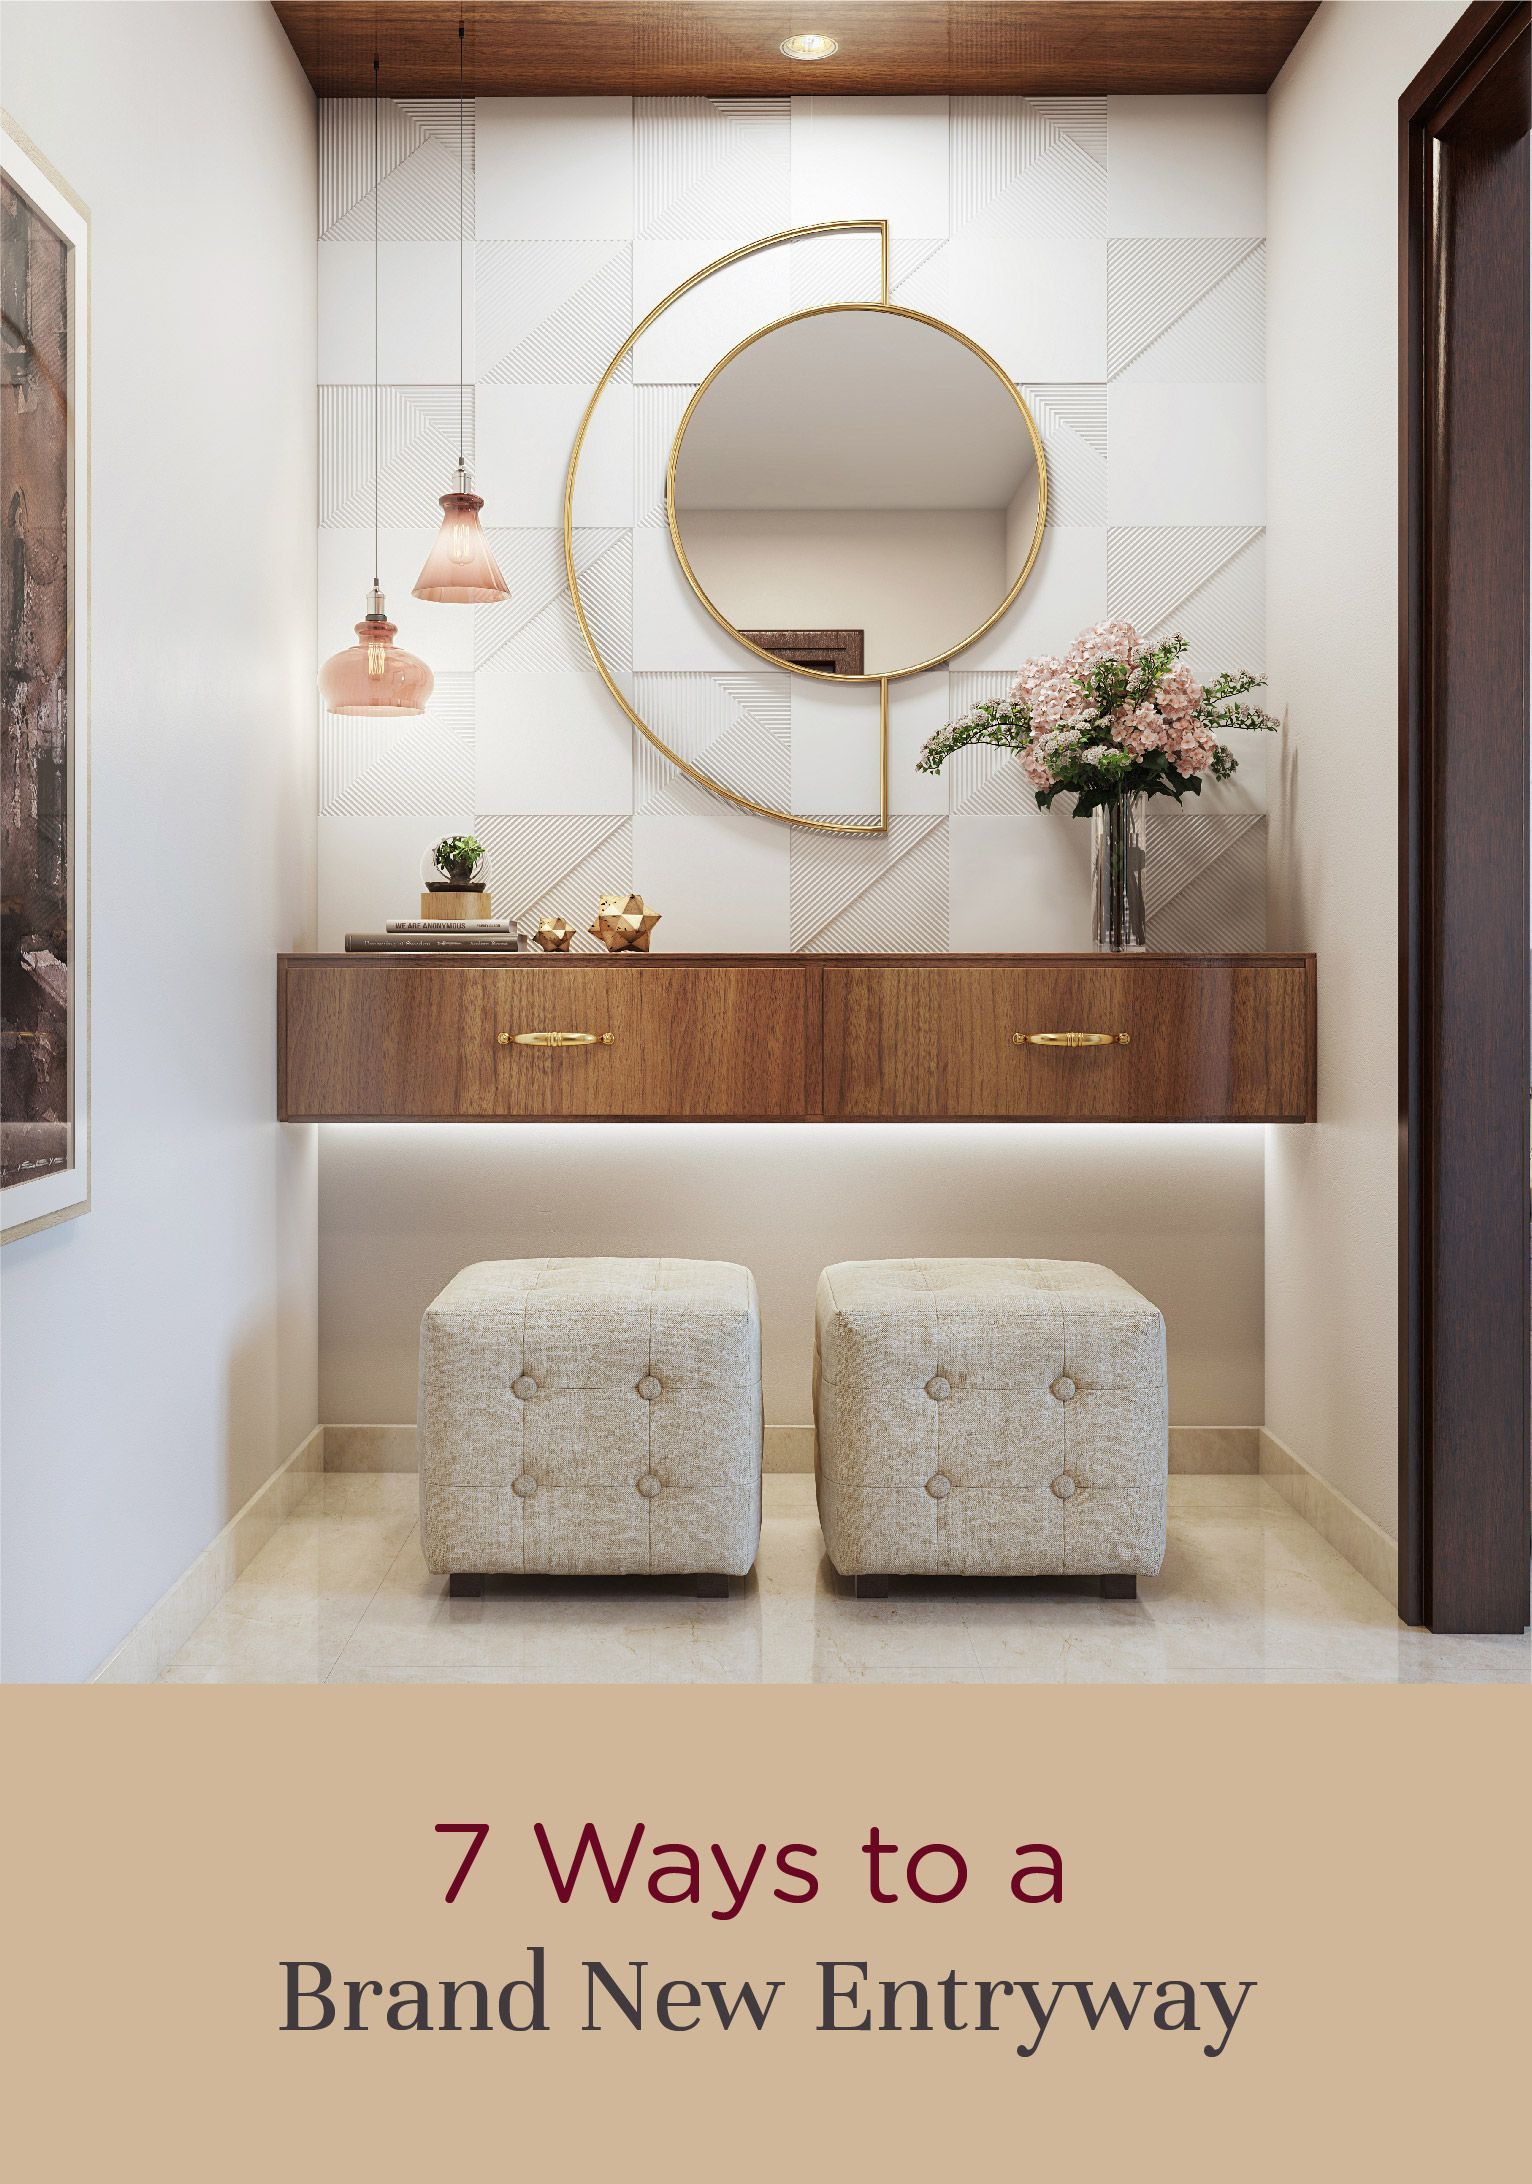 Transform The Entryway To Your House With These Simple But